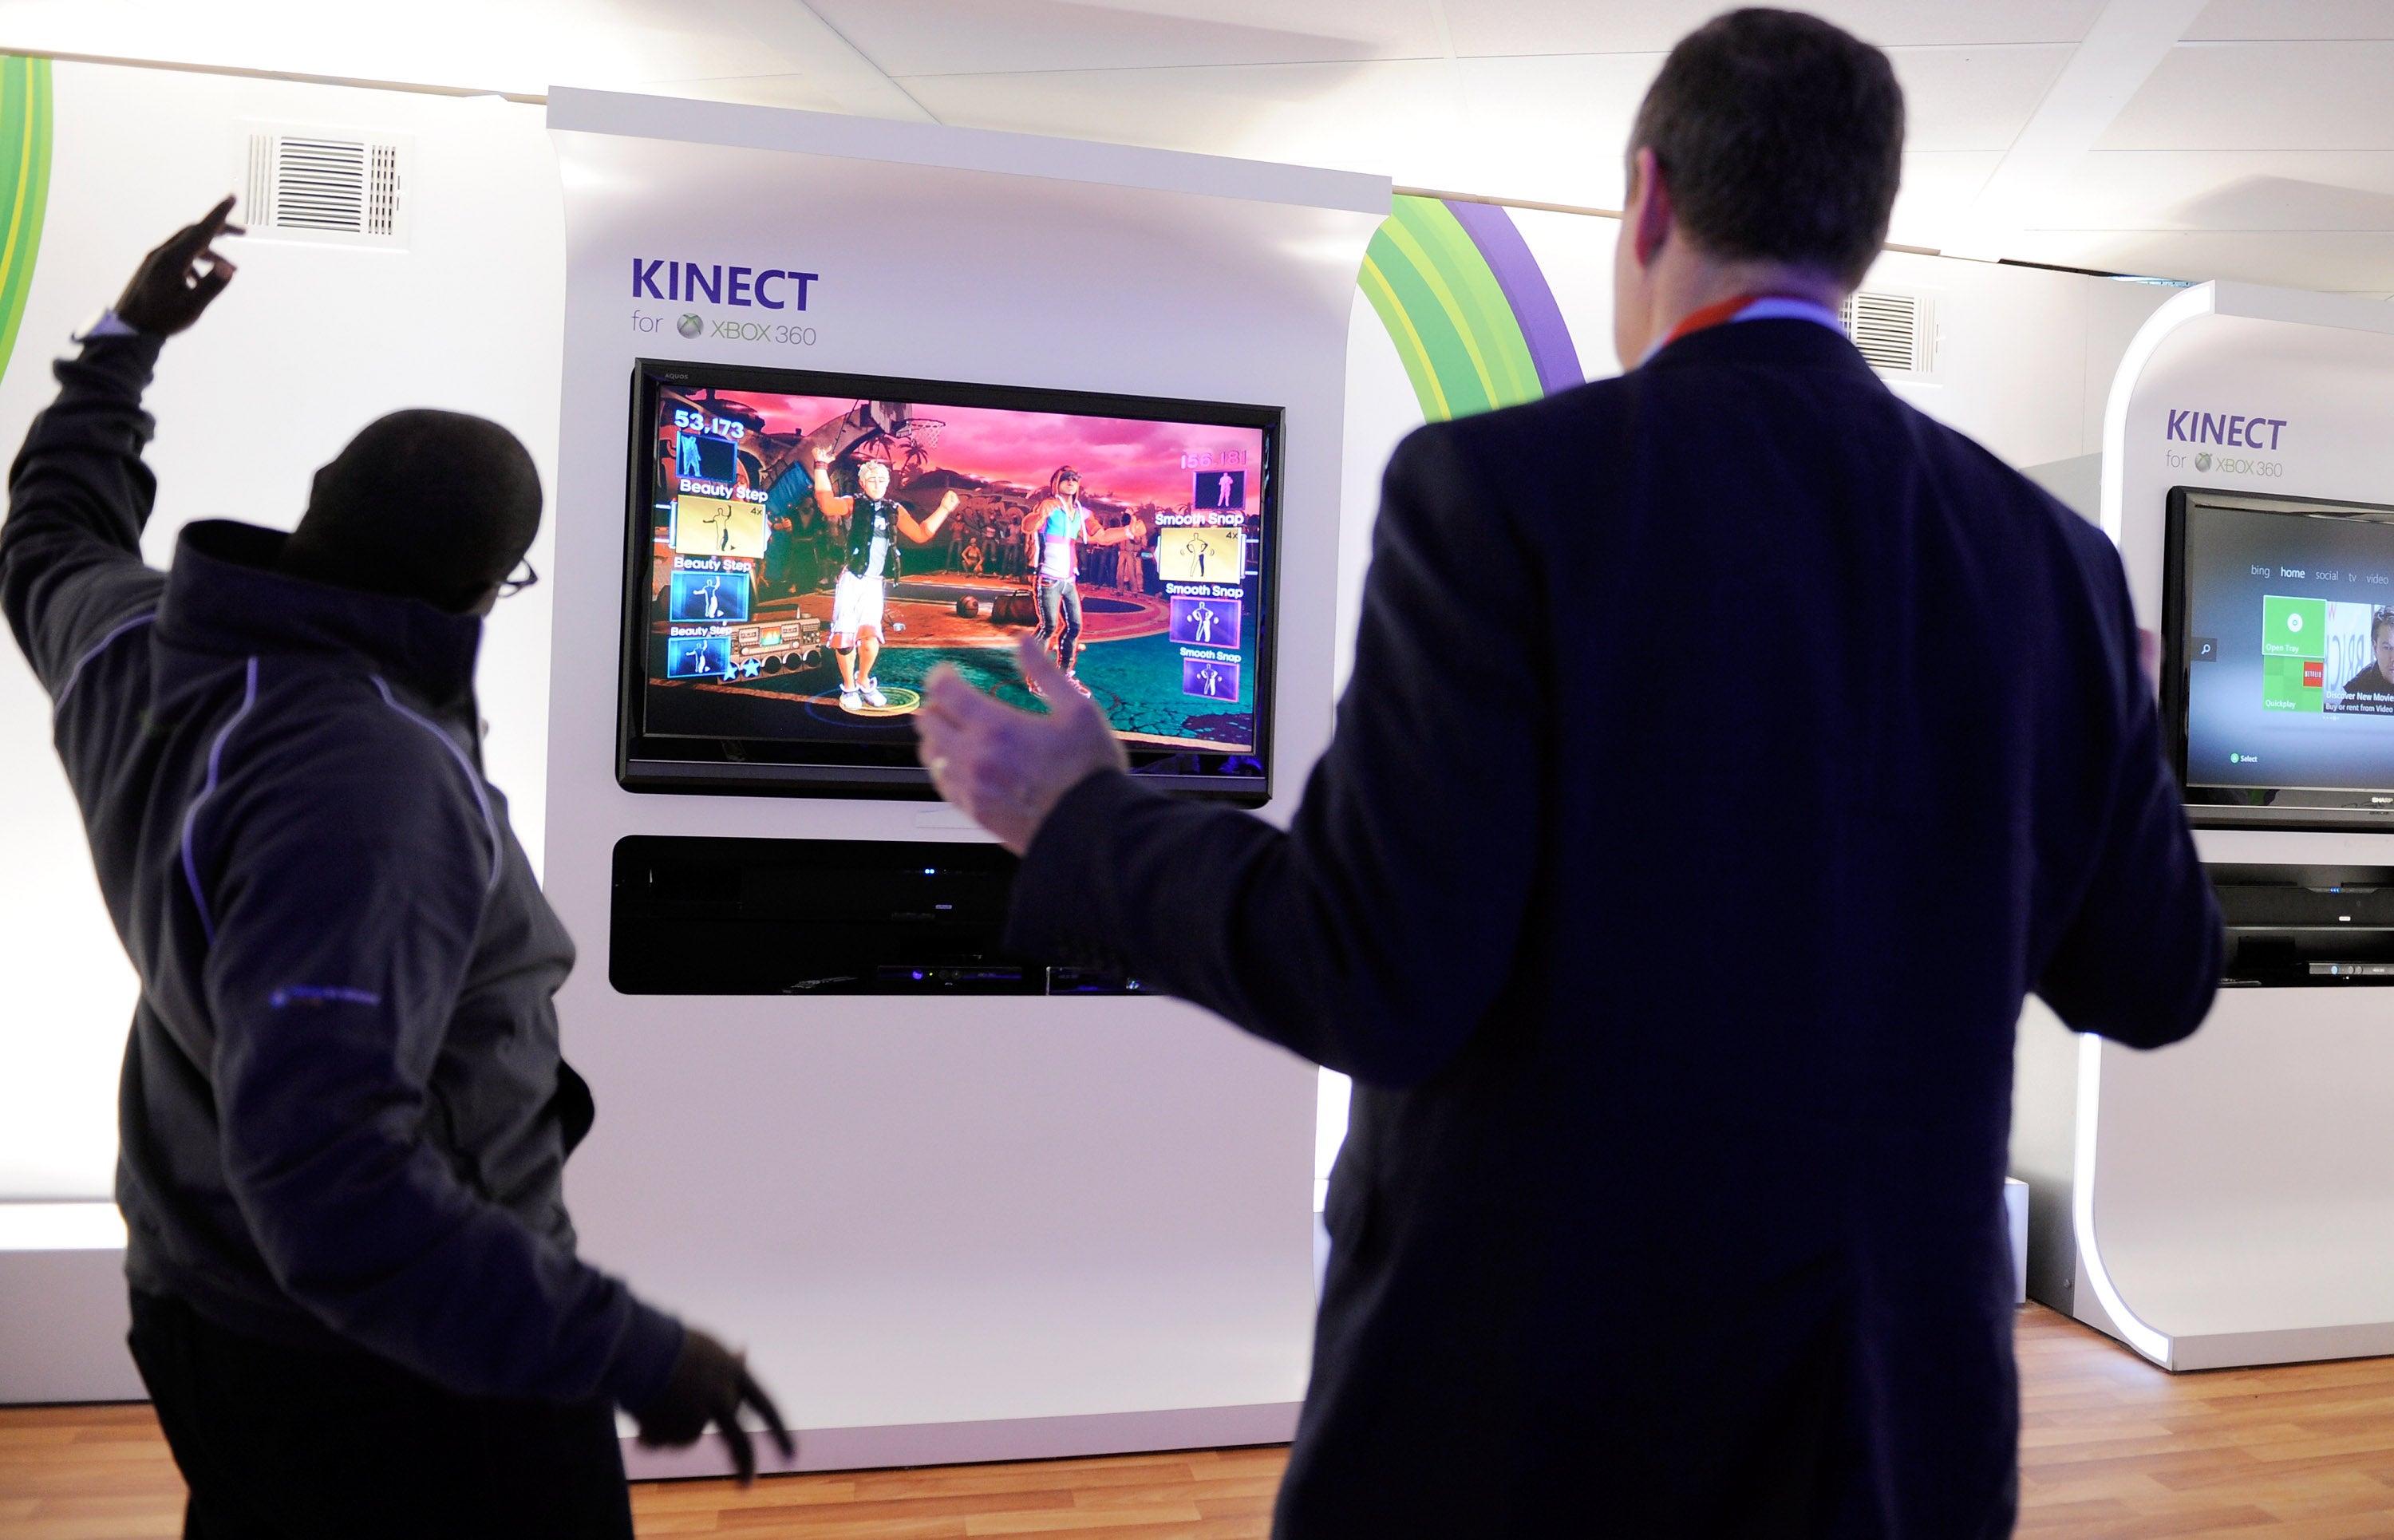 The Kinect was aimed at expanding the Xbox 360's user base but was often criticized for using unintuitive controls.